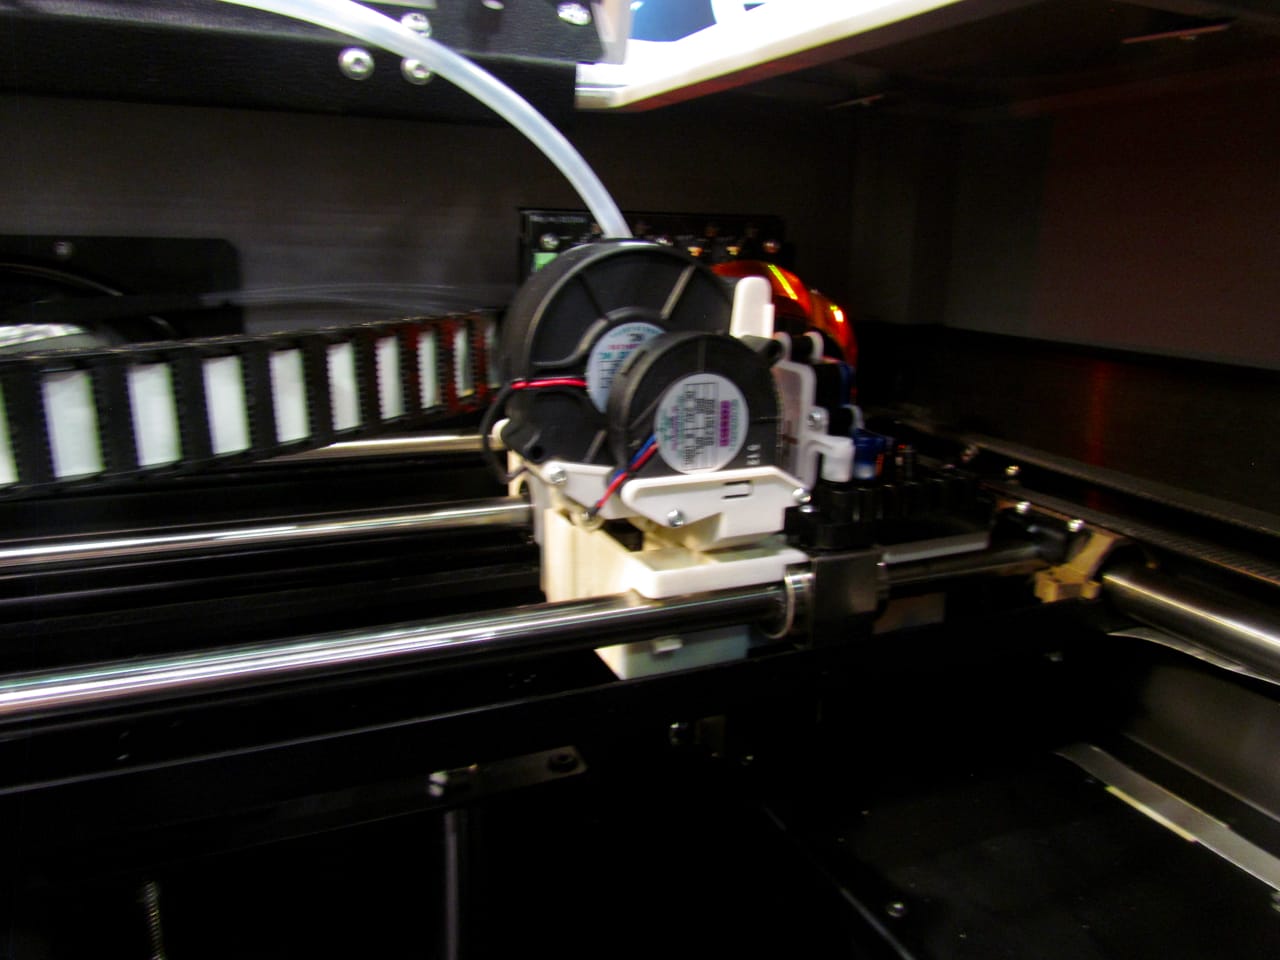  The Rize 3D print extruder, which includes both plastic and liquid deposition mechanisms 